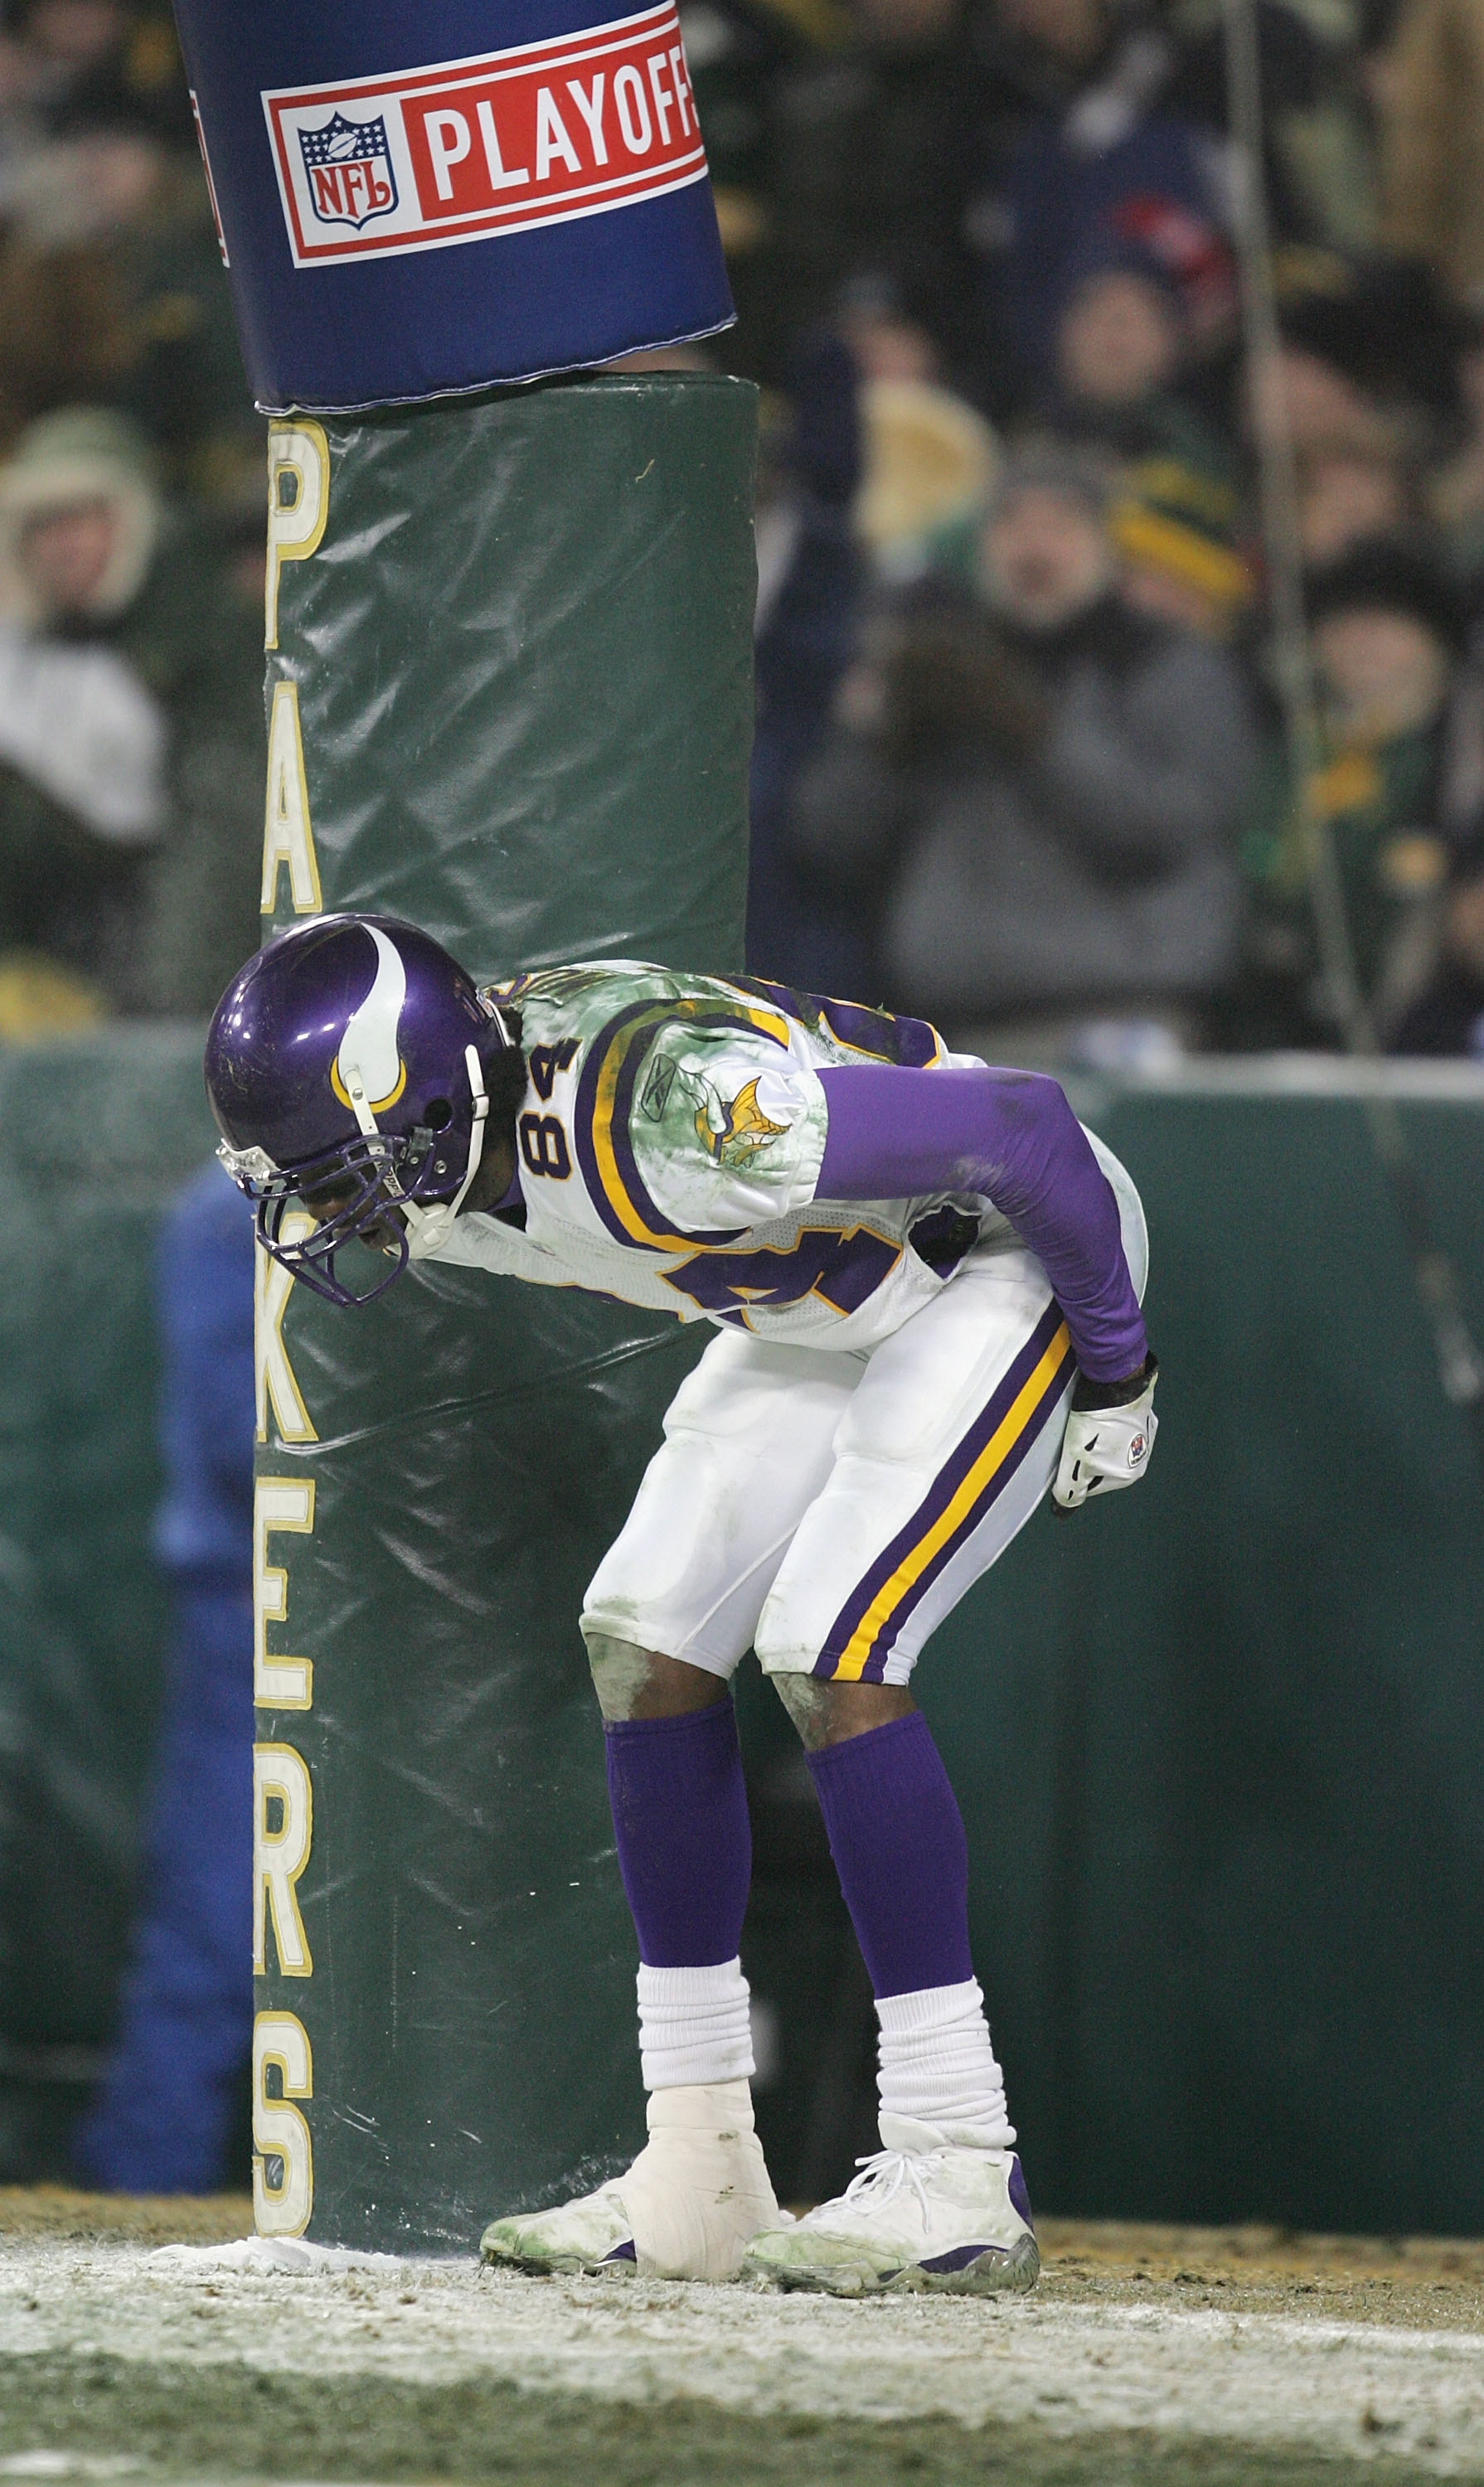 Wide receiver Randy Moss of the Minnesota Vikings takes a knee